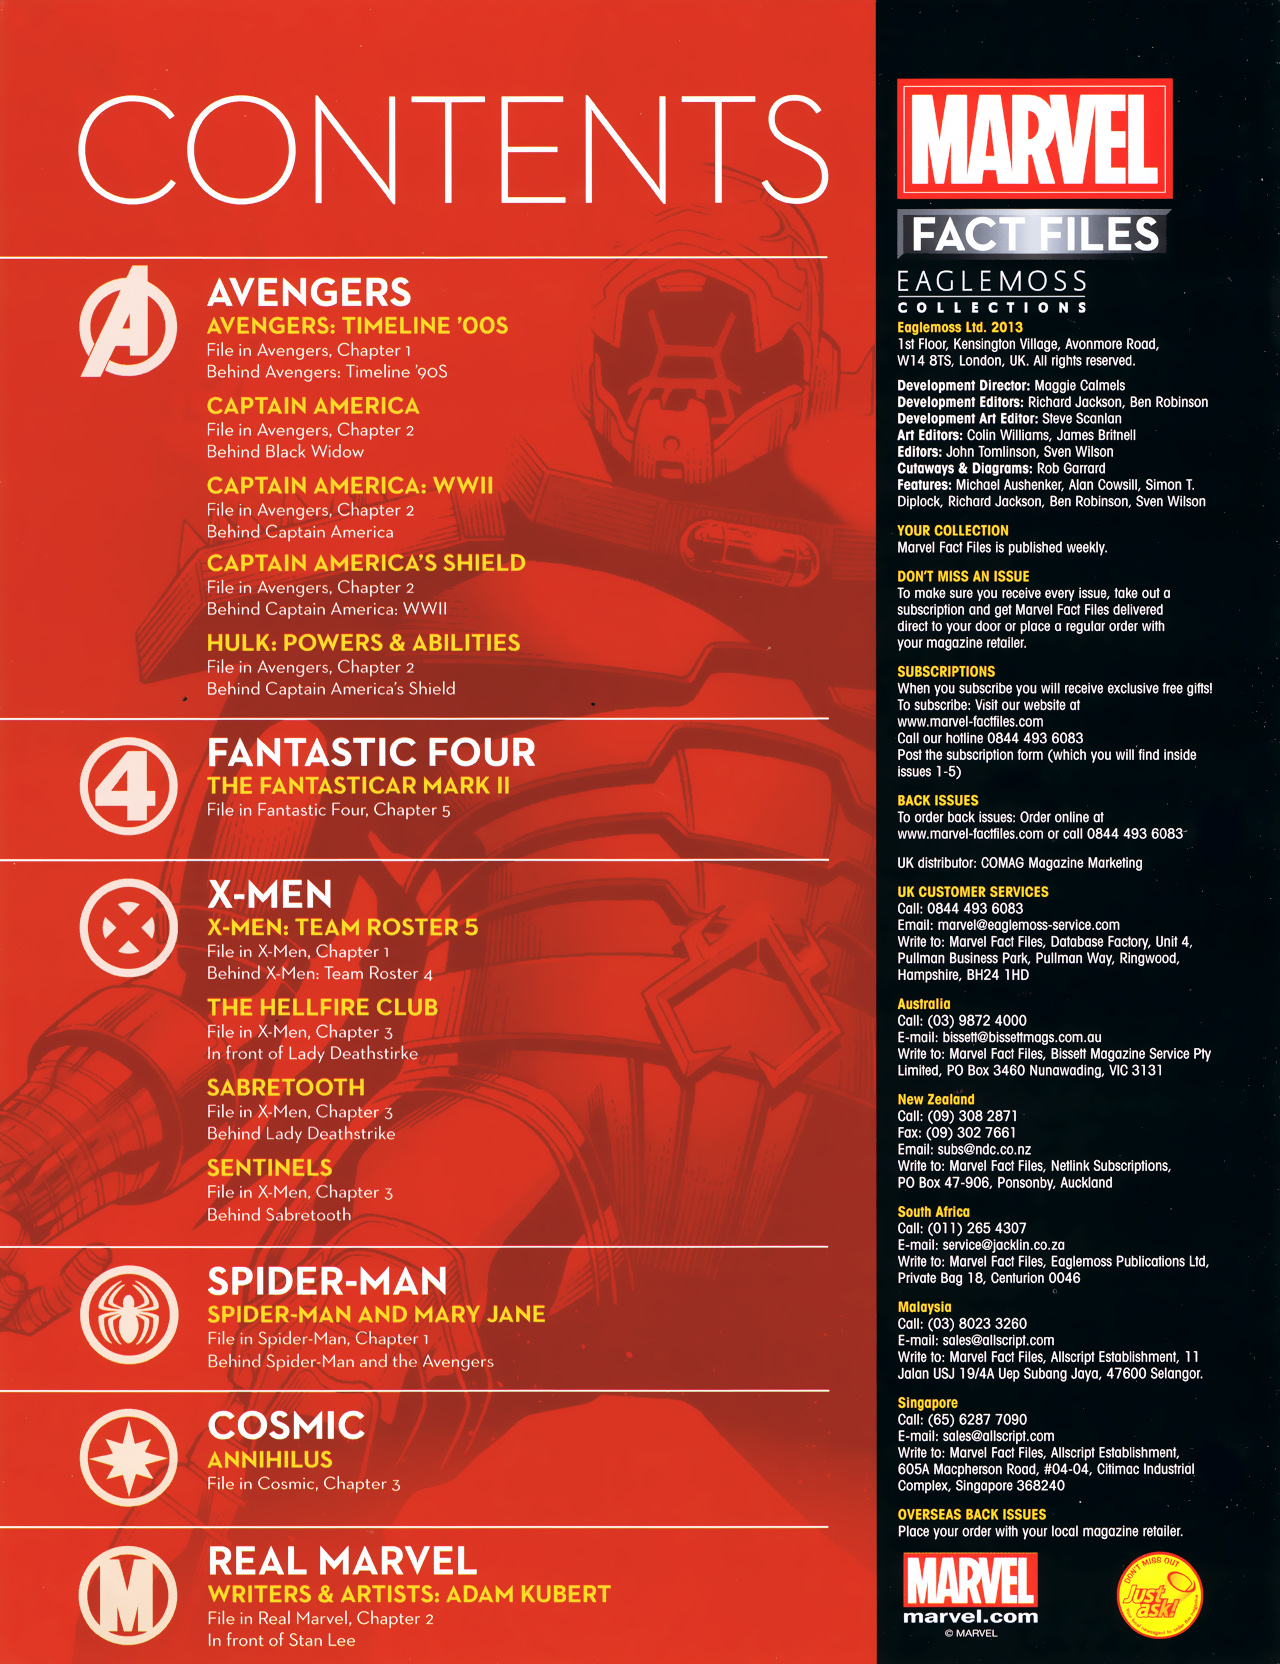 Read online Marvel Fact Files comic -  Issue #5 - 2